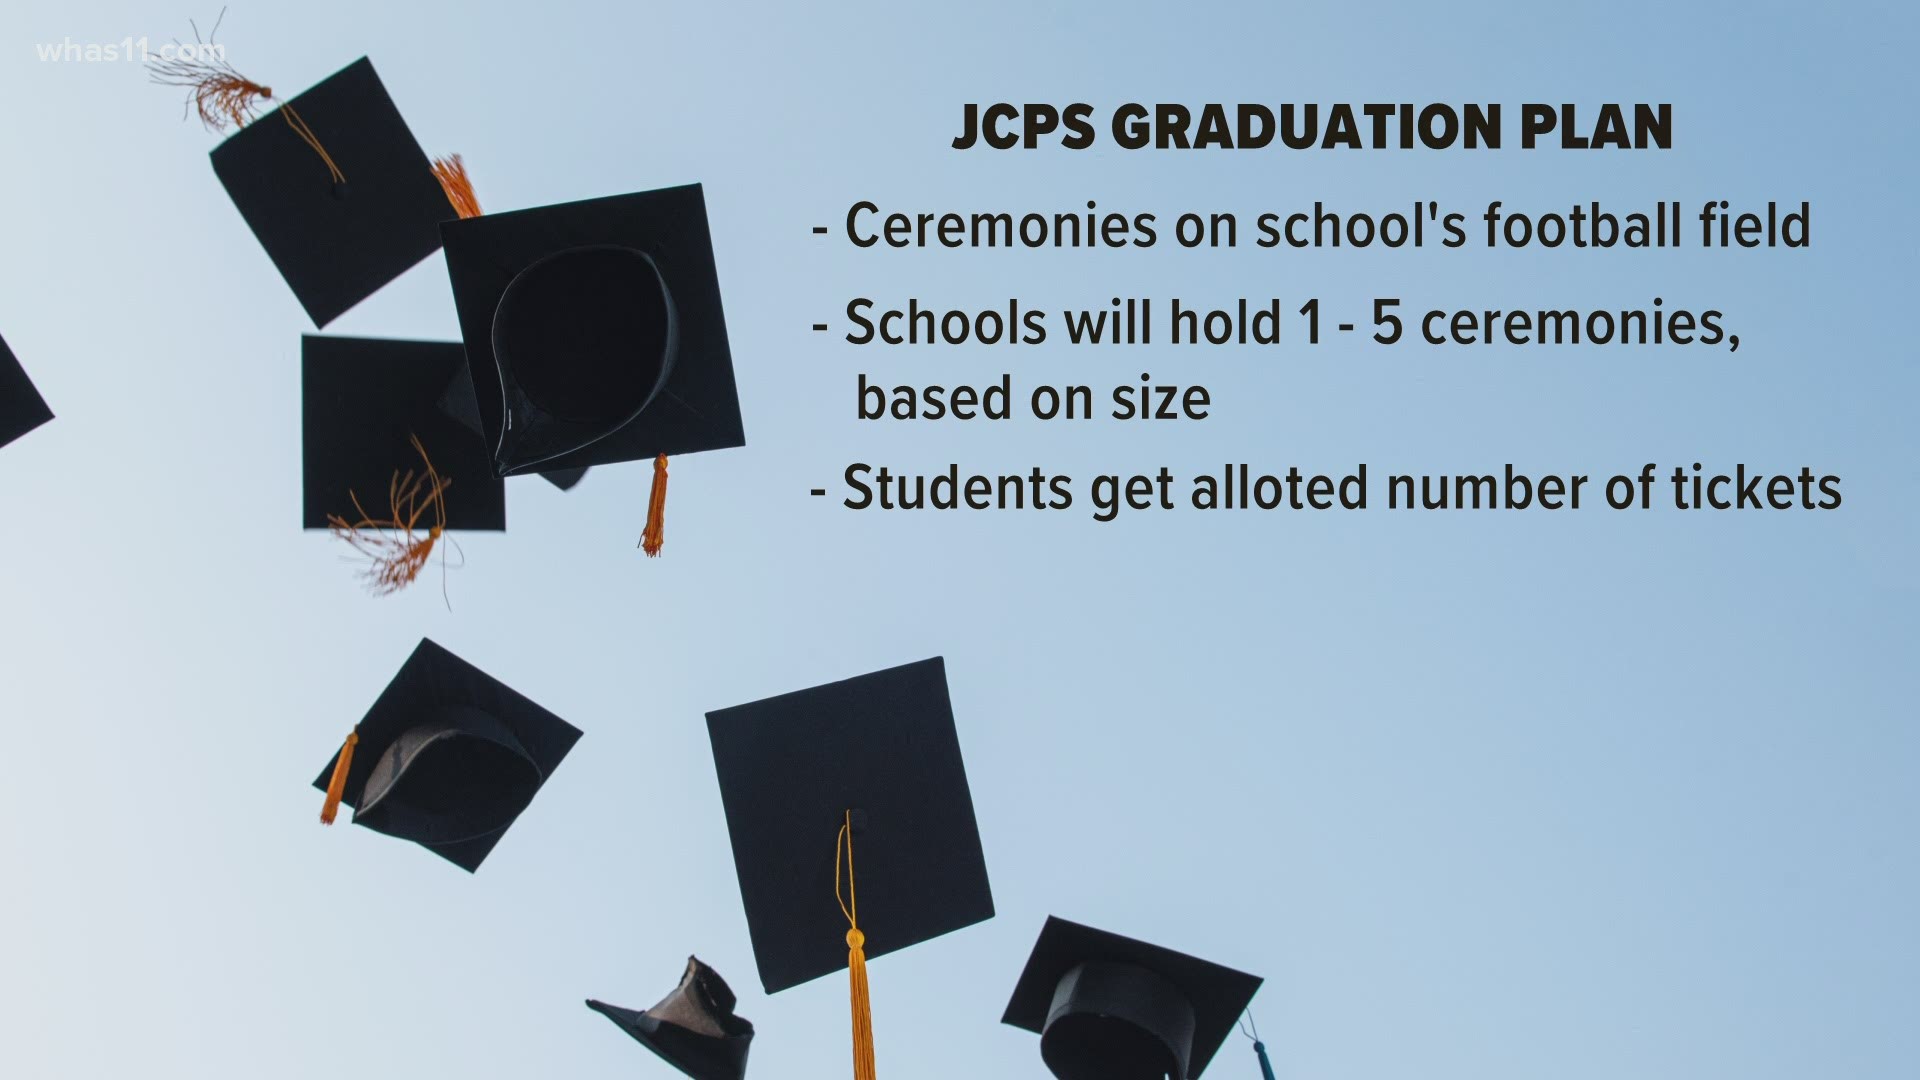 If approved by the Board high school seniors will graduate in front of their friends and family at their school's football field.